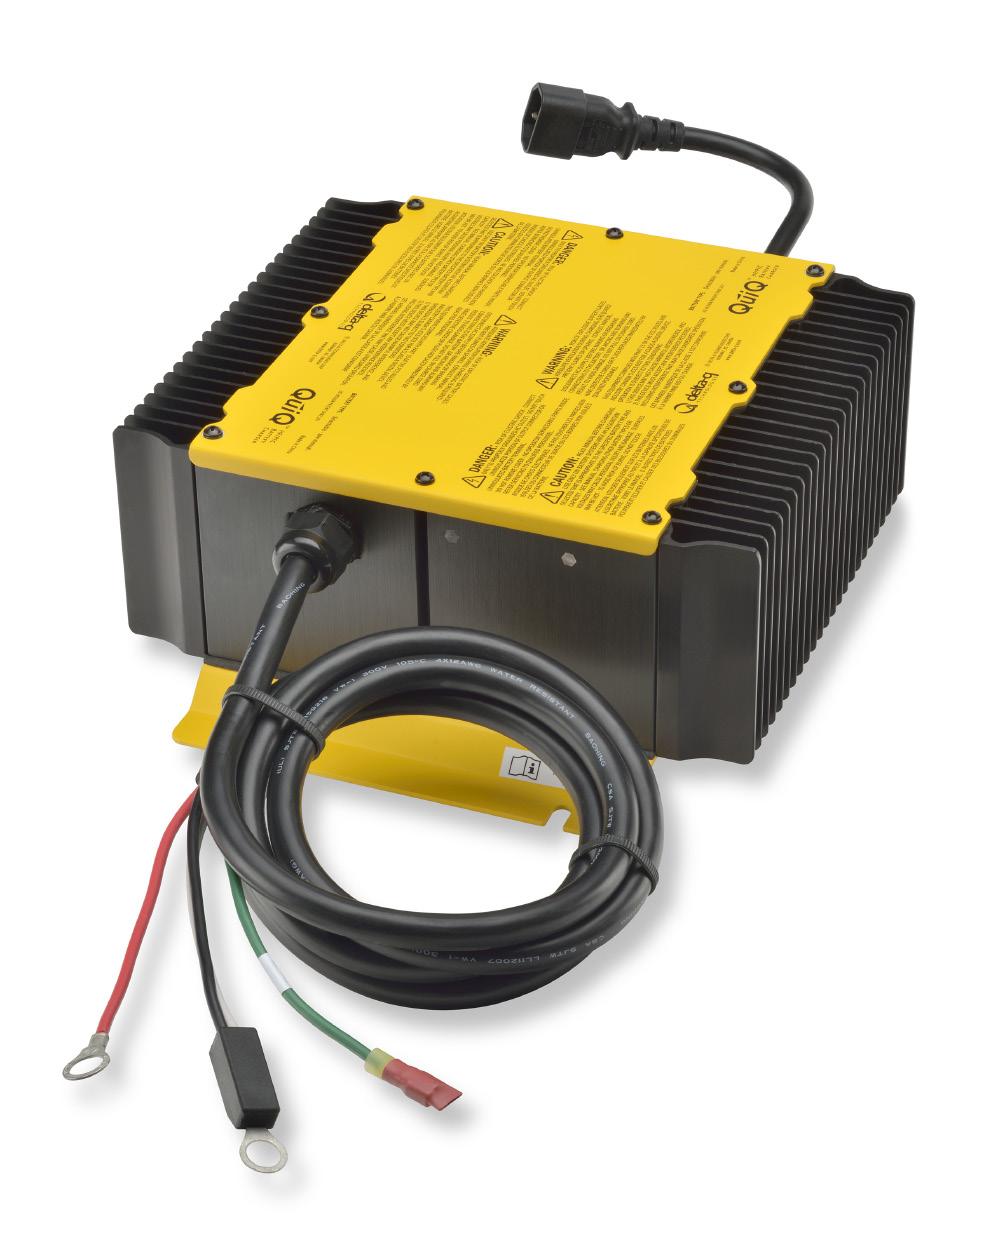 FEATURES Wide range AC mains input (85 265 VAC) allows use of one charger anywhere in the world and eliminates the need to stock and service multiple models.